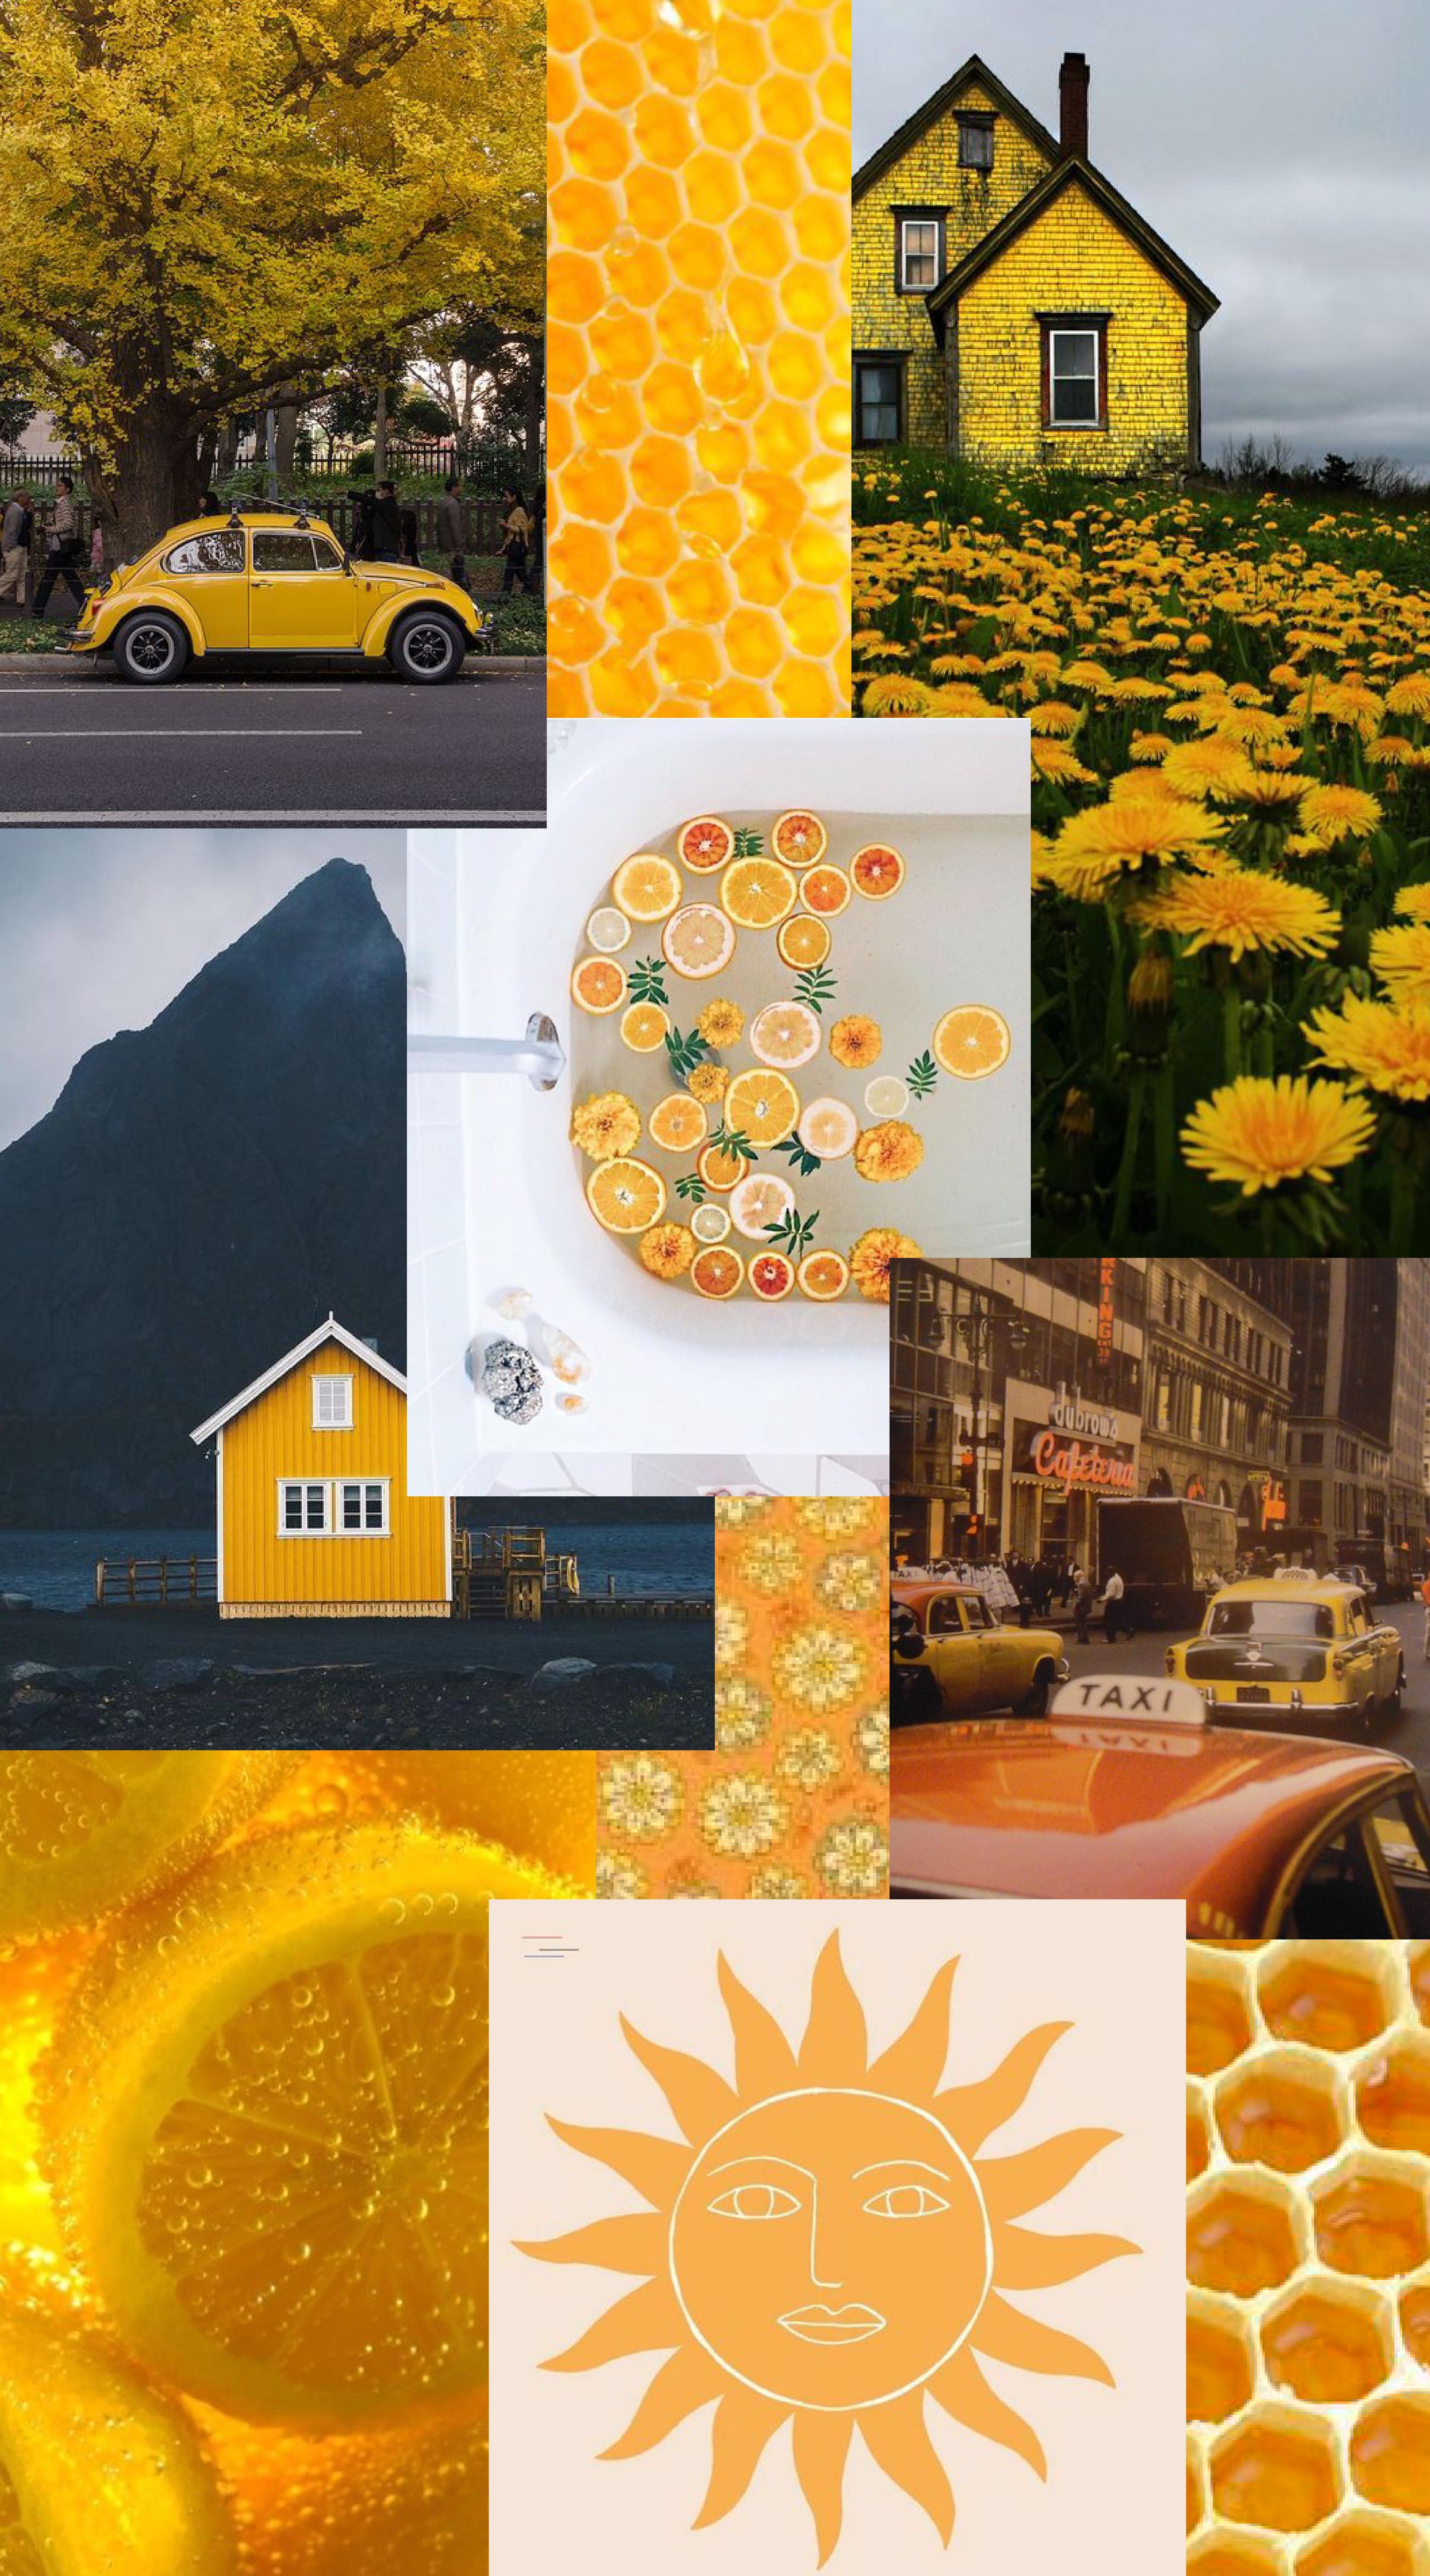 yellow summer aesthetic imagery for phone wallpaper